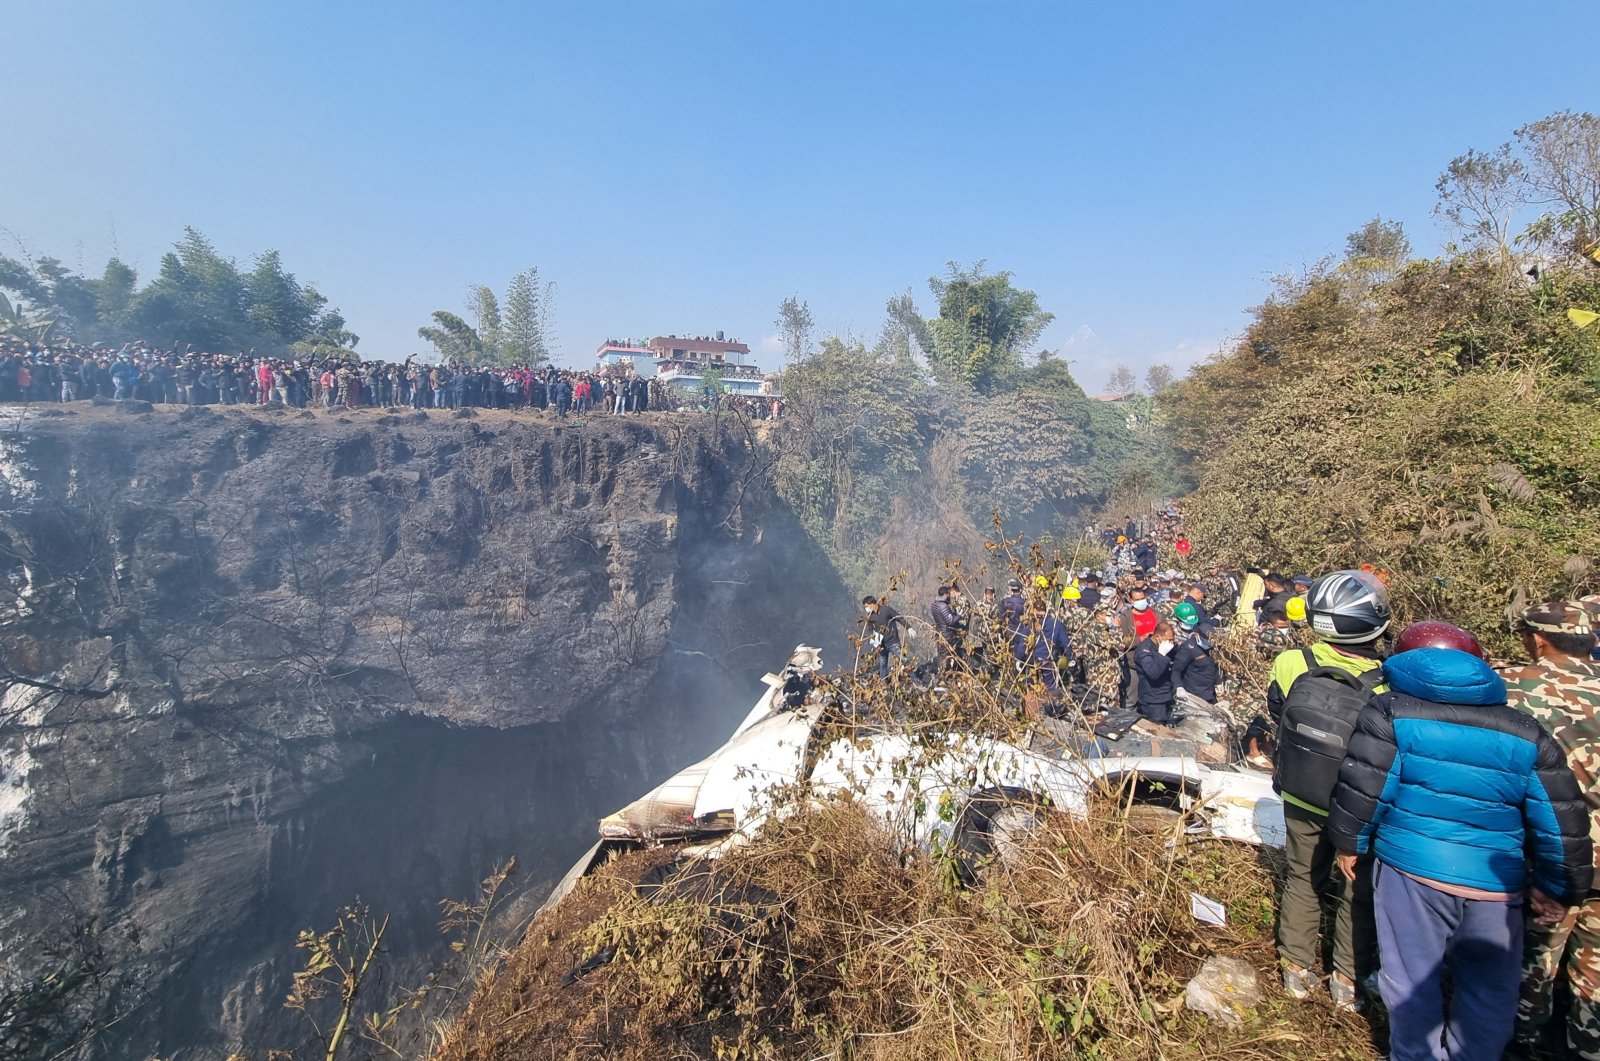 Crowds gather as rescue teams work to retrieve bodies at the crash site of an aircraft carrying 72 people in Pokhara, Nepal, Jan. 15, 2023. (Reuters Photo)